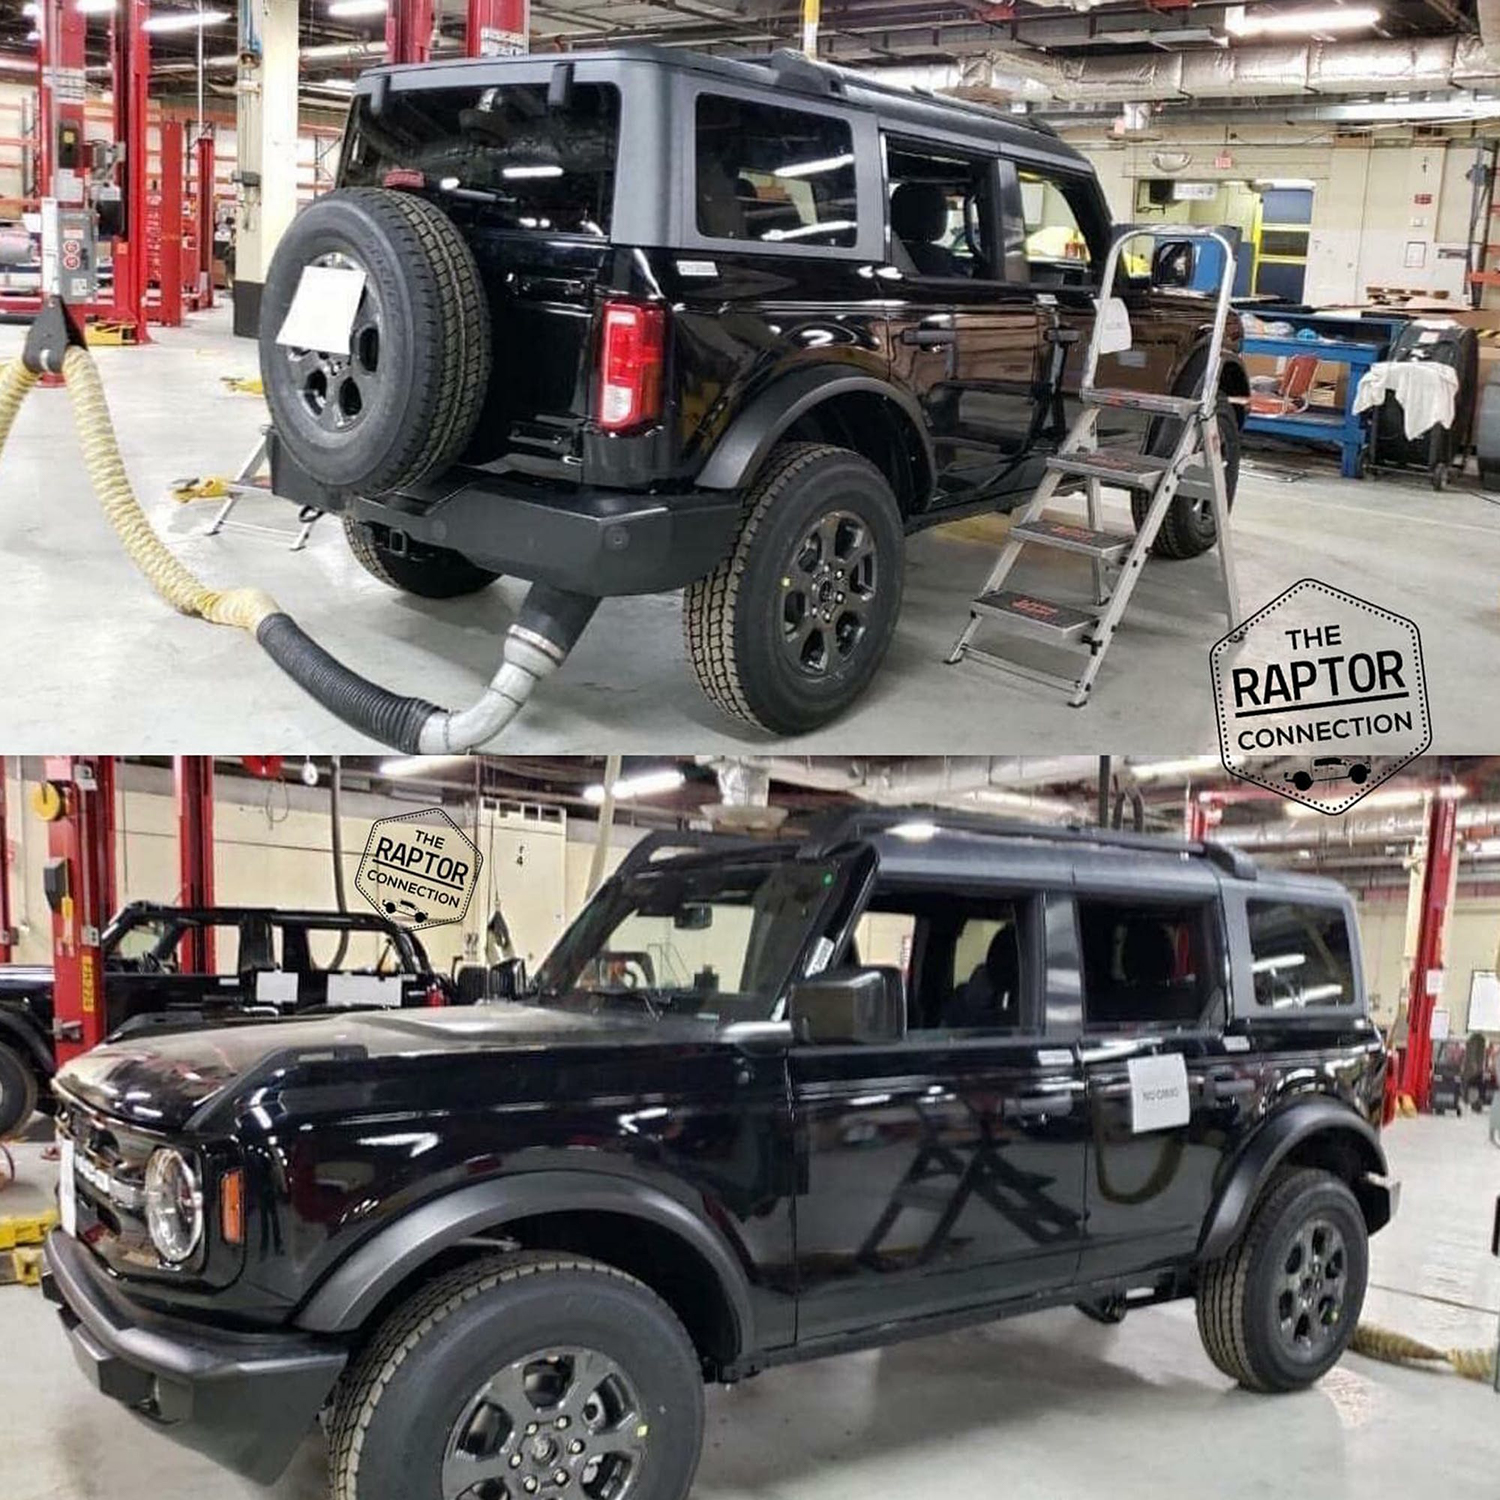 A Trove of (Authentic?) 2021 Ford Bronco Photos Just Leaked - InsideHook